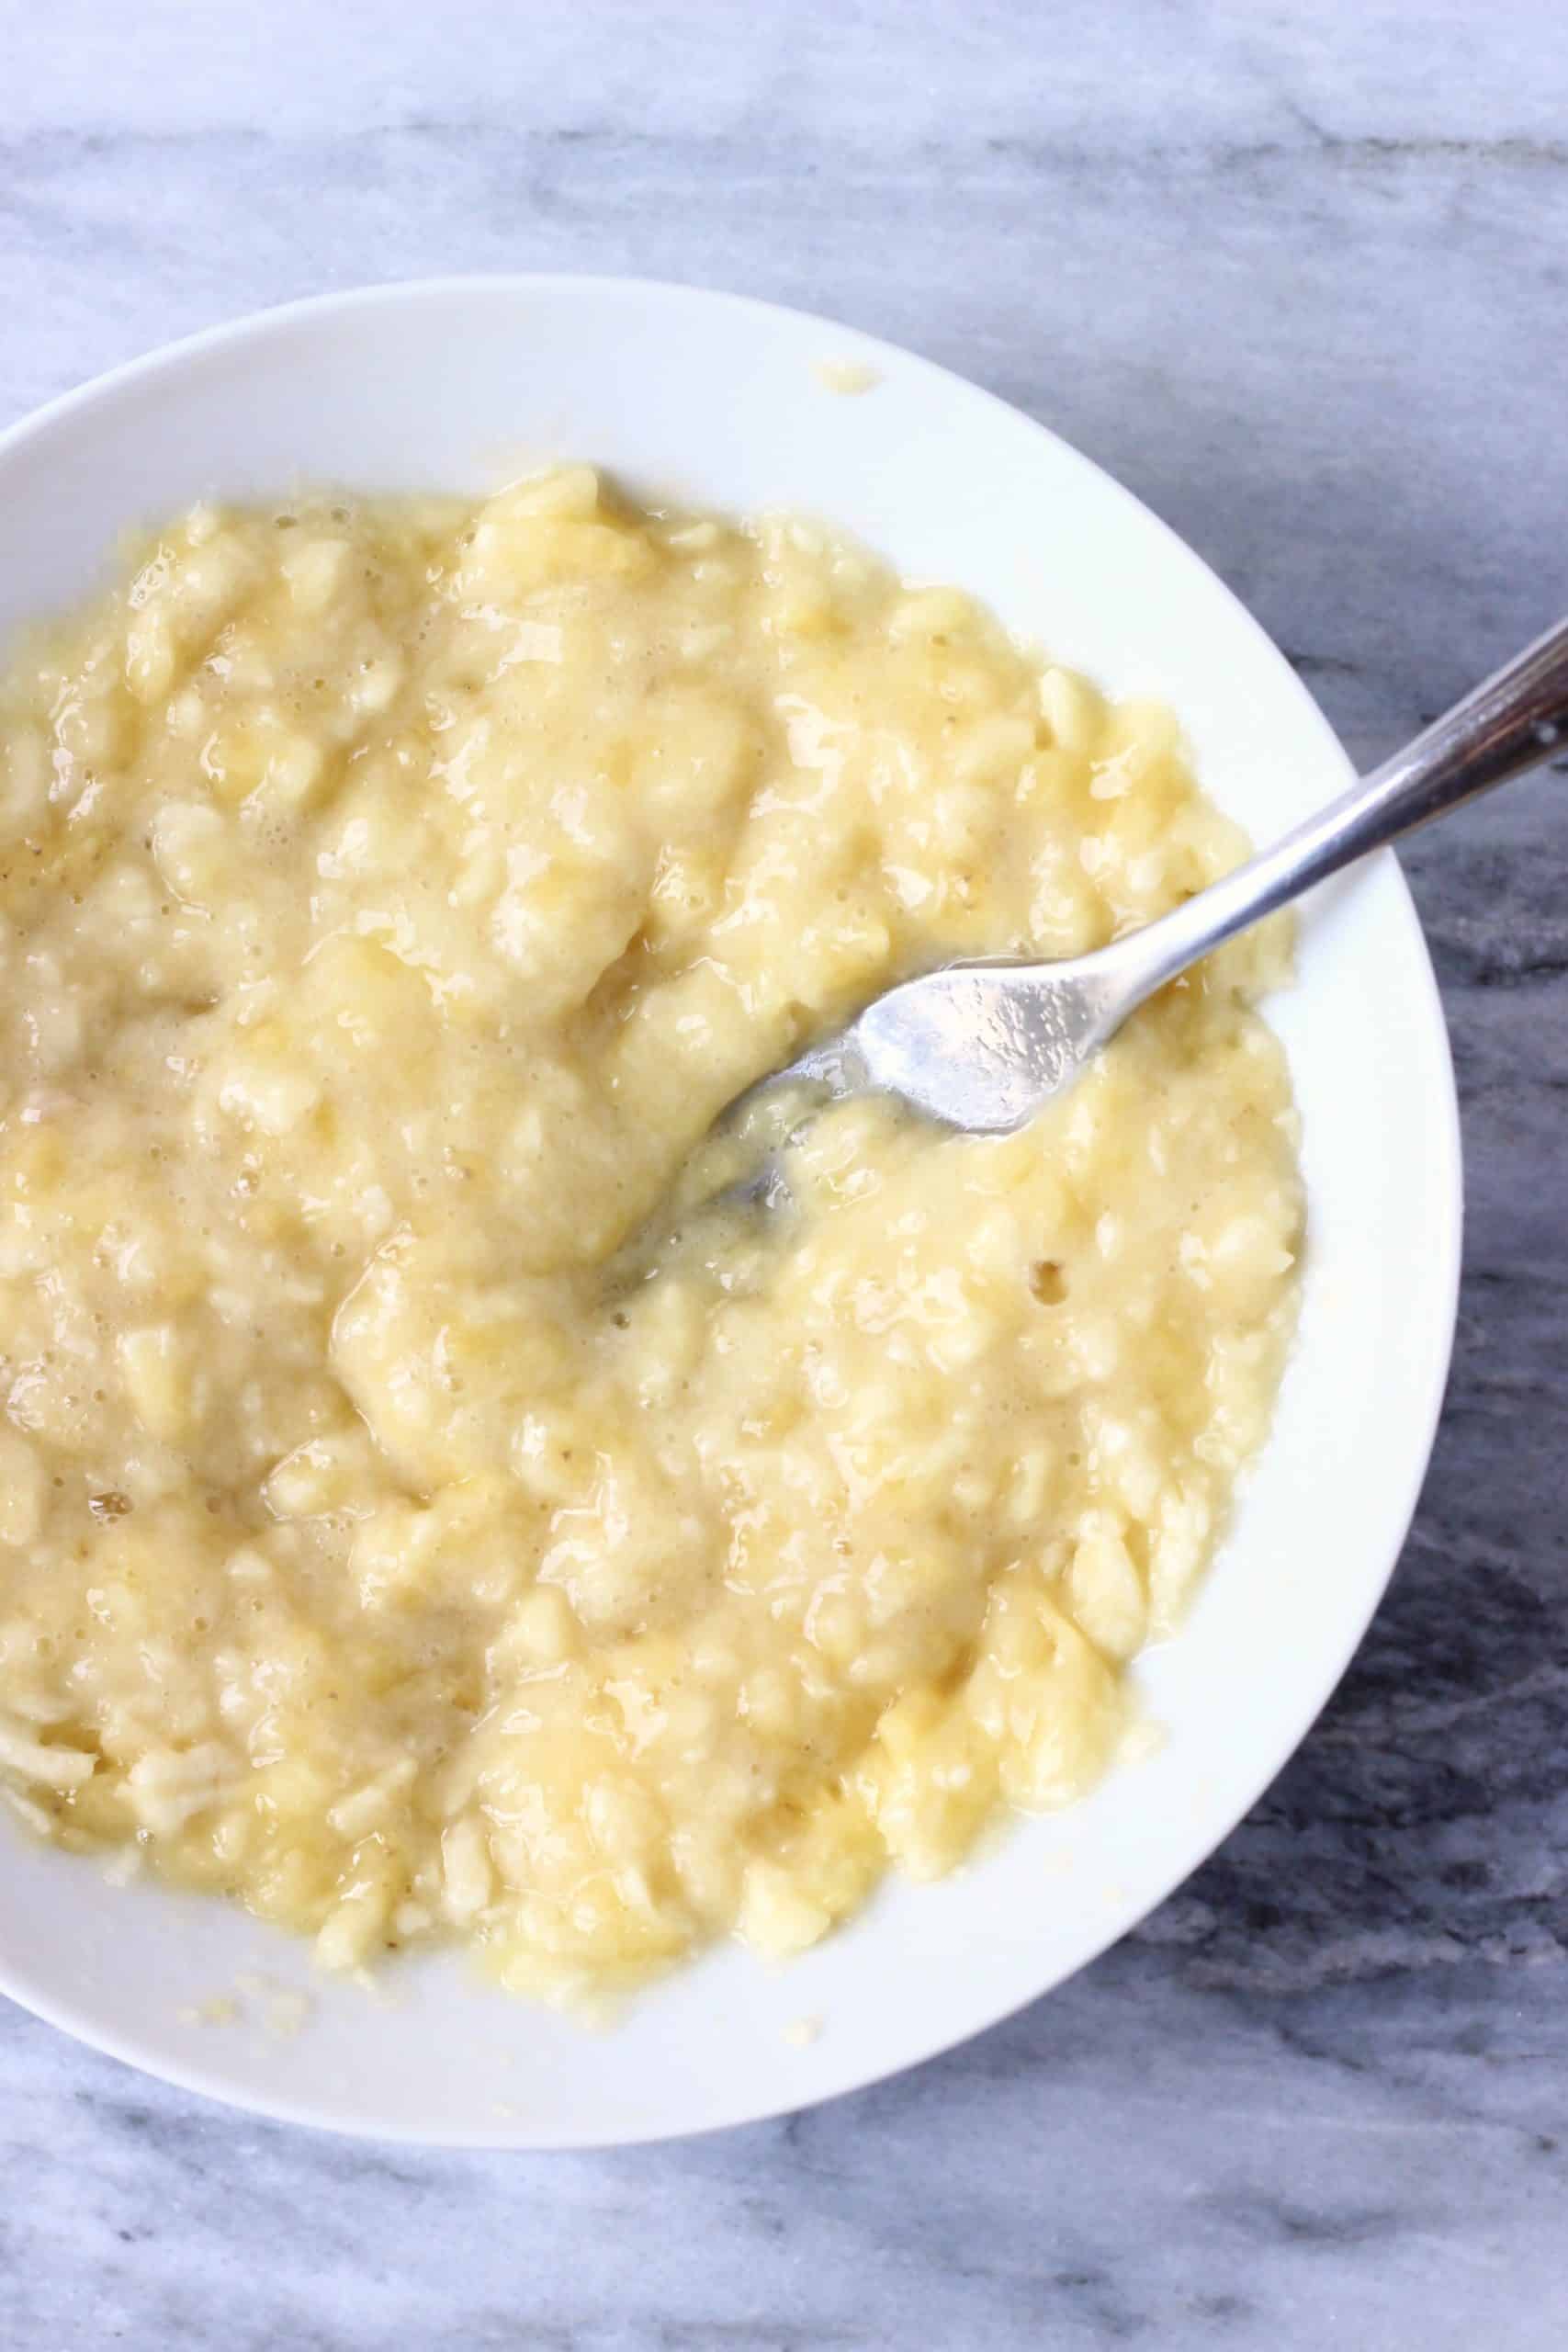 Mashed bananas in a white bowl with a fork